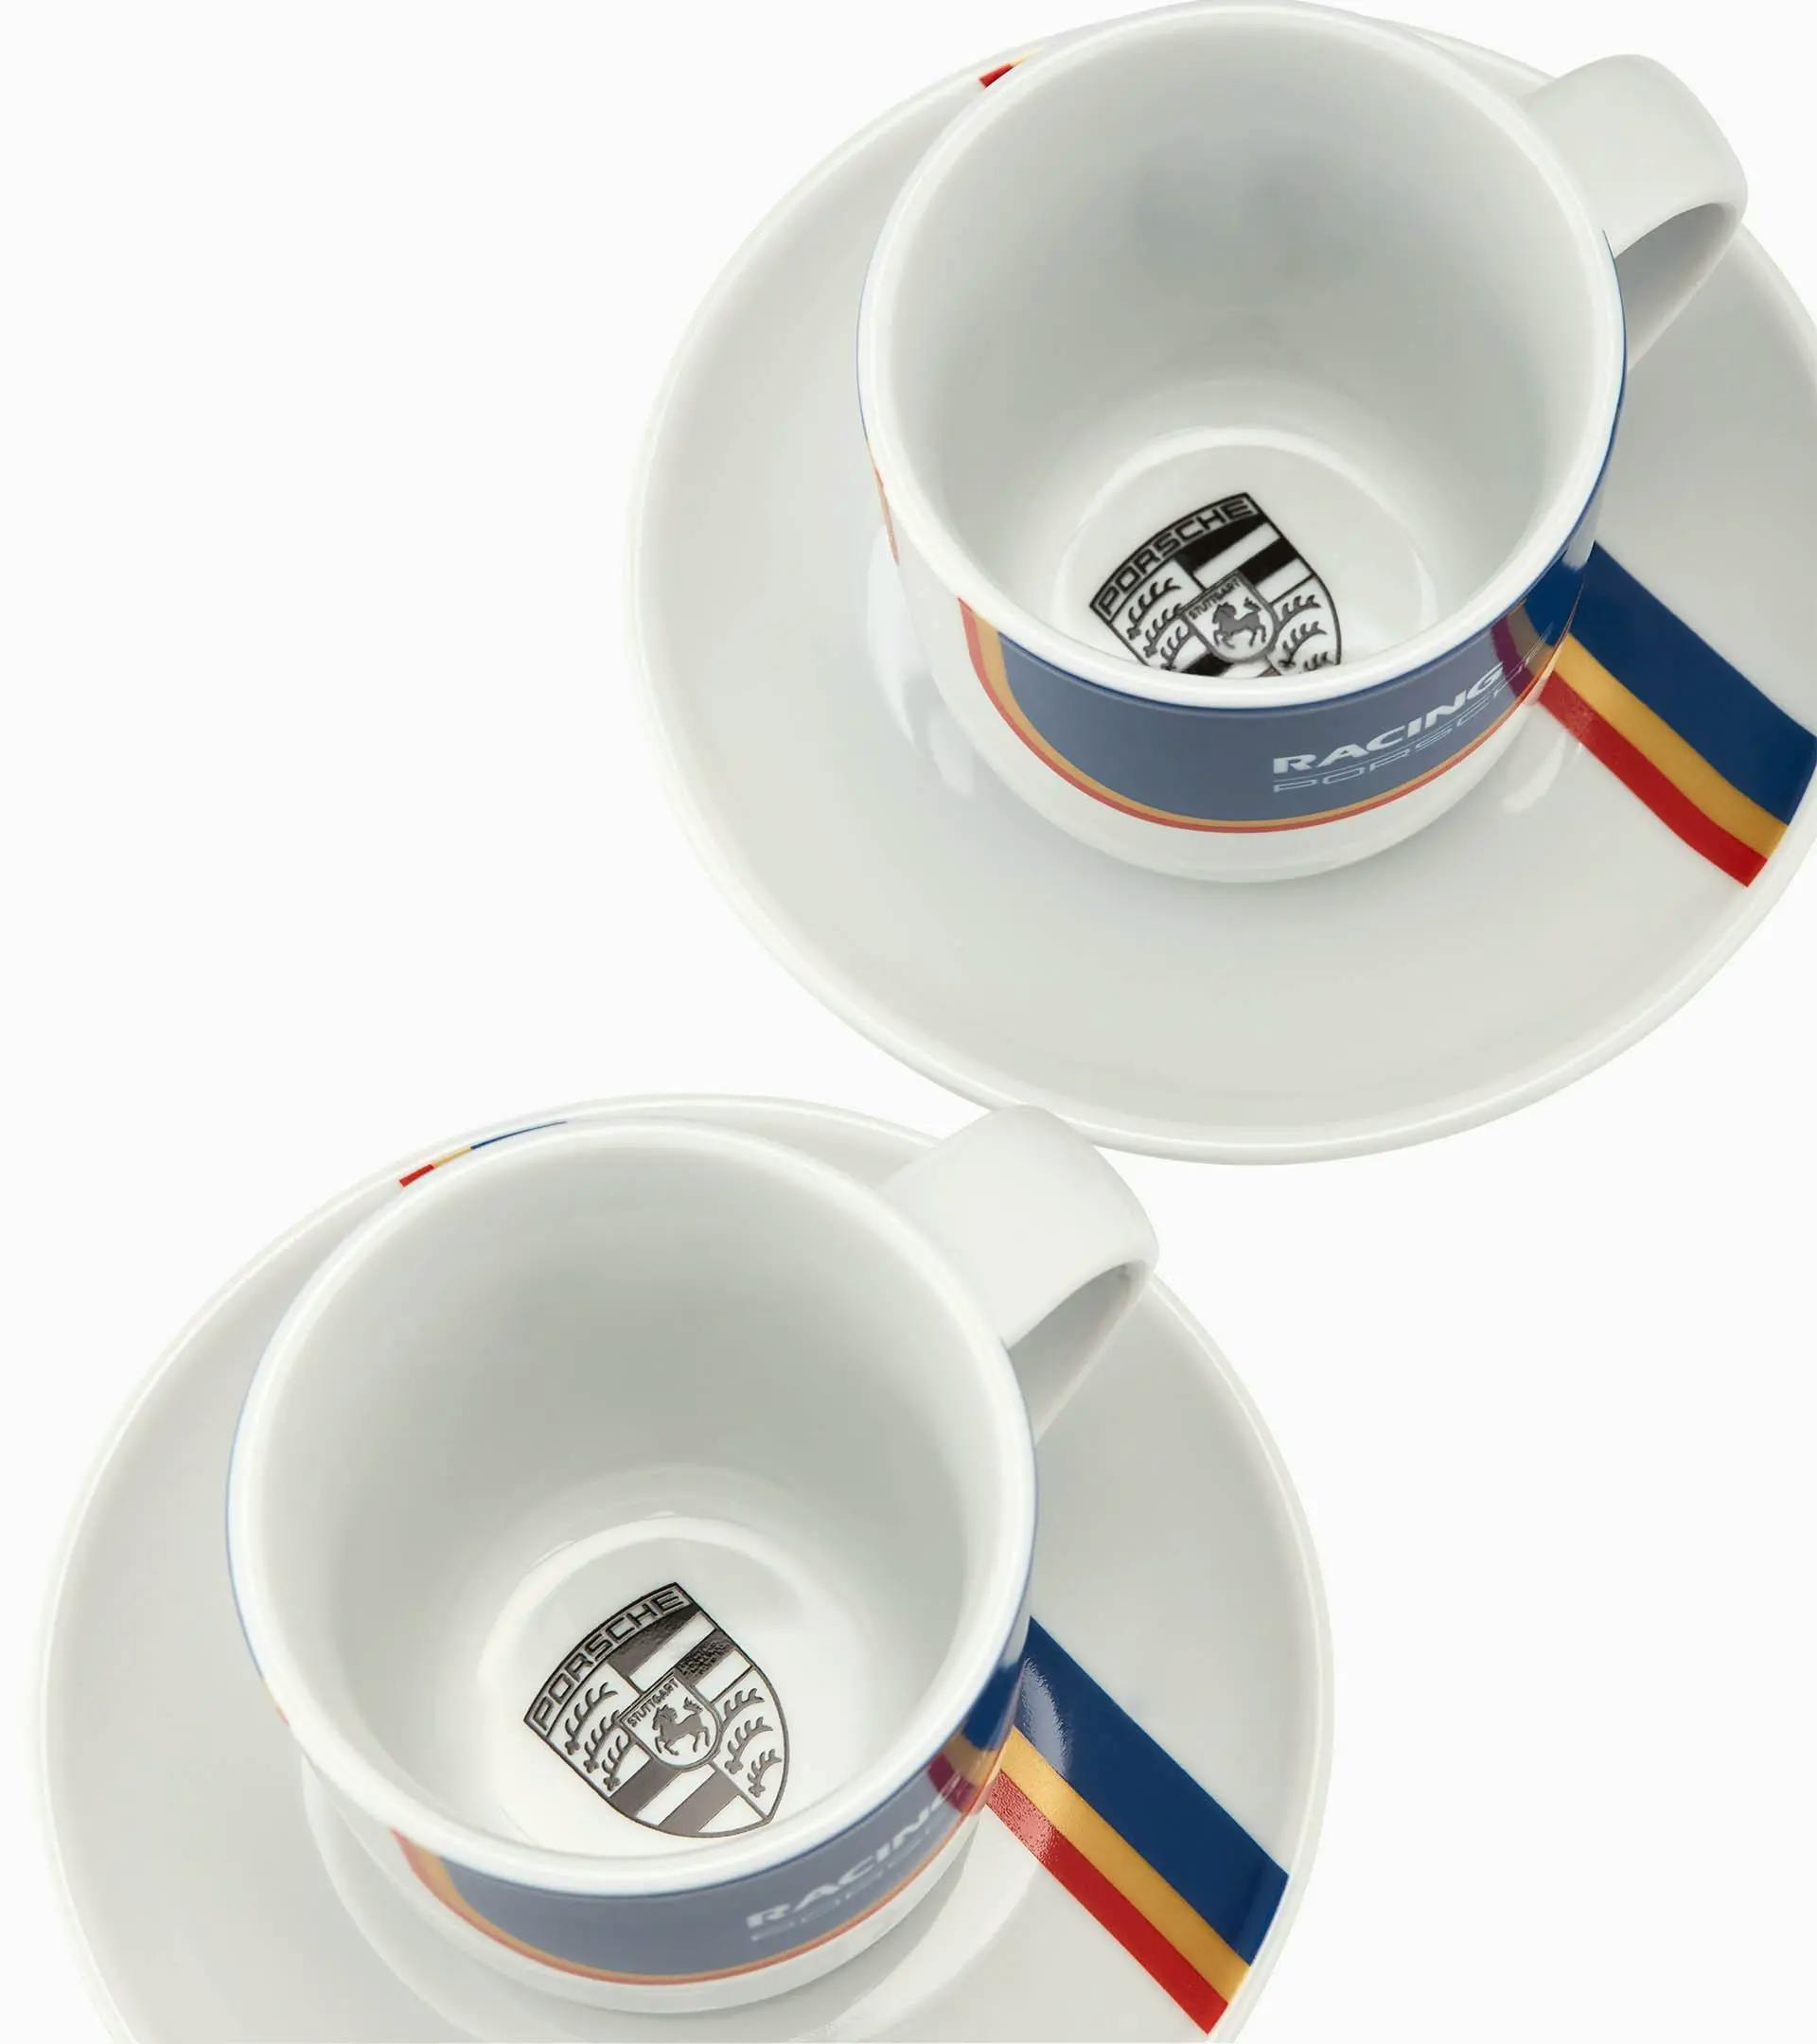 Collector's Espresso Duo No. 5 – Limited Edition – Racing thumbnail 1